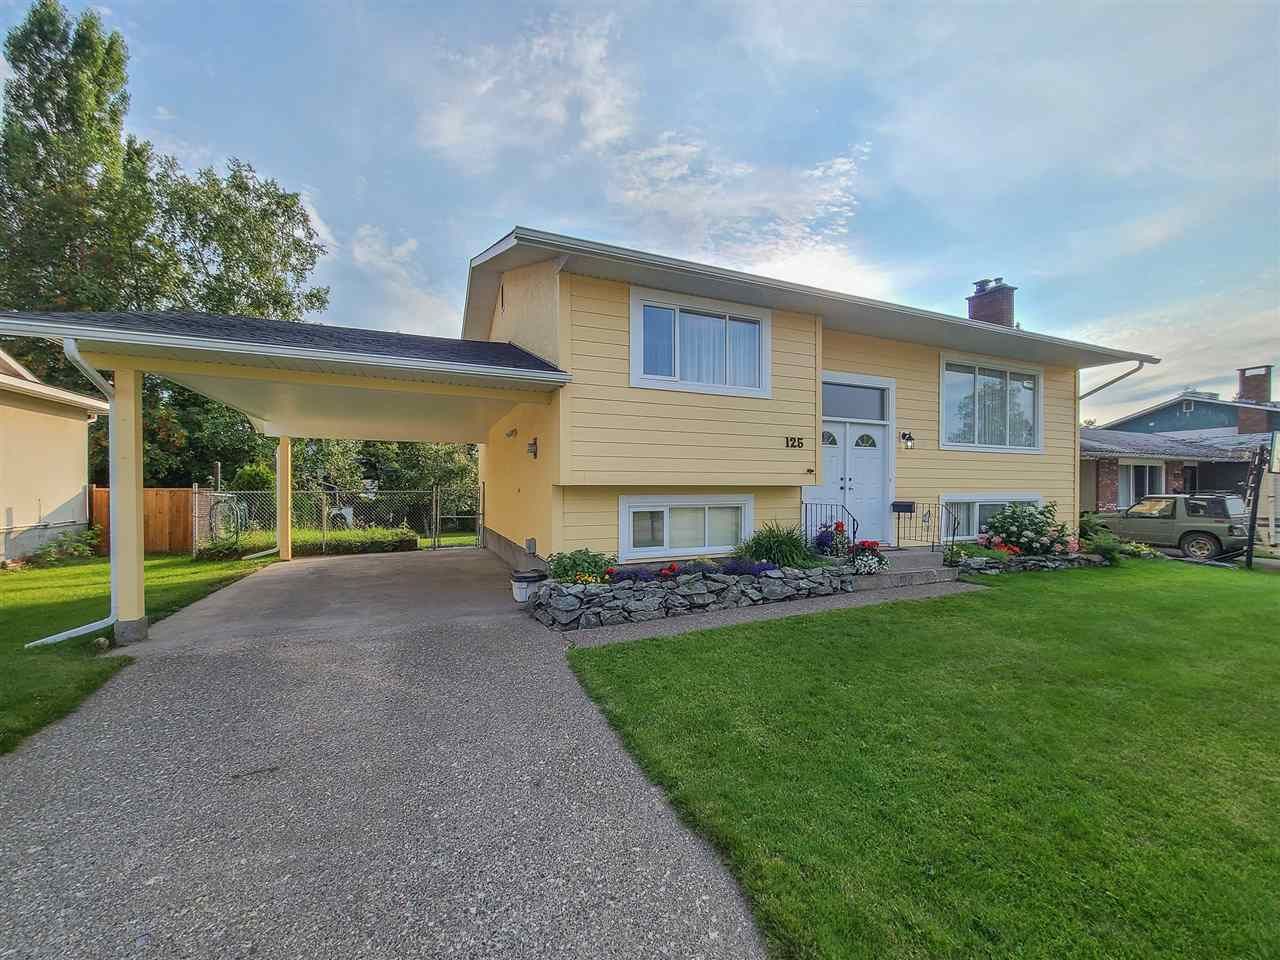 Main Photo: 125 MCDERMID Drive in Prince George: Highland Park House for sale (PG City West (Zone 71))  : MLS®# R2494604